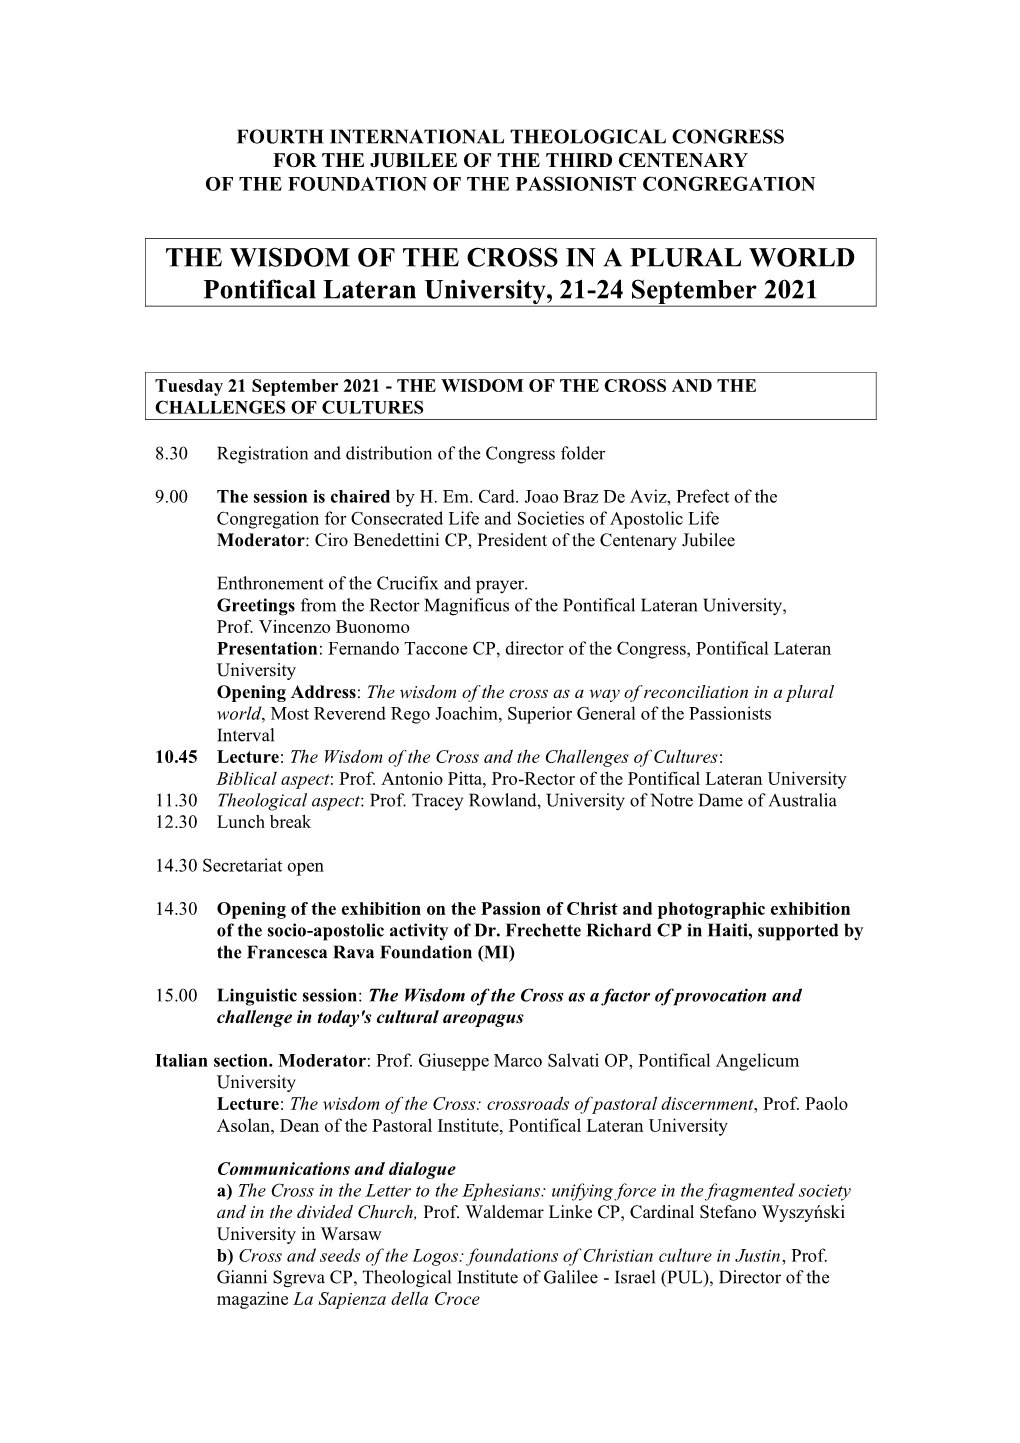 THE WISDOM of the CROSS in a PLURAL WORLD Pontifical Lateran University, 21-24 September 2021